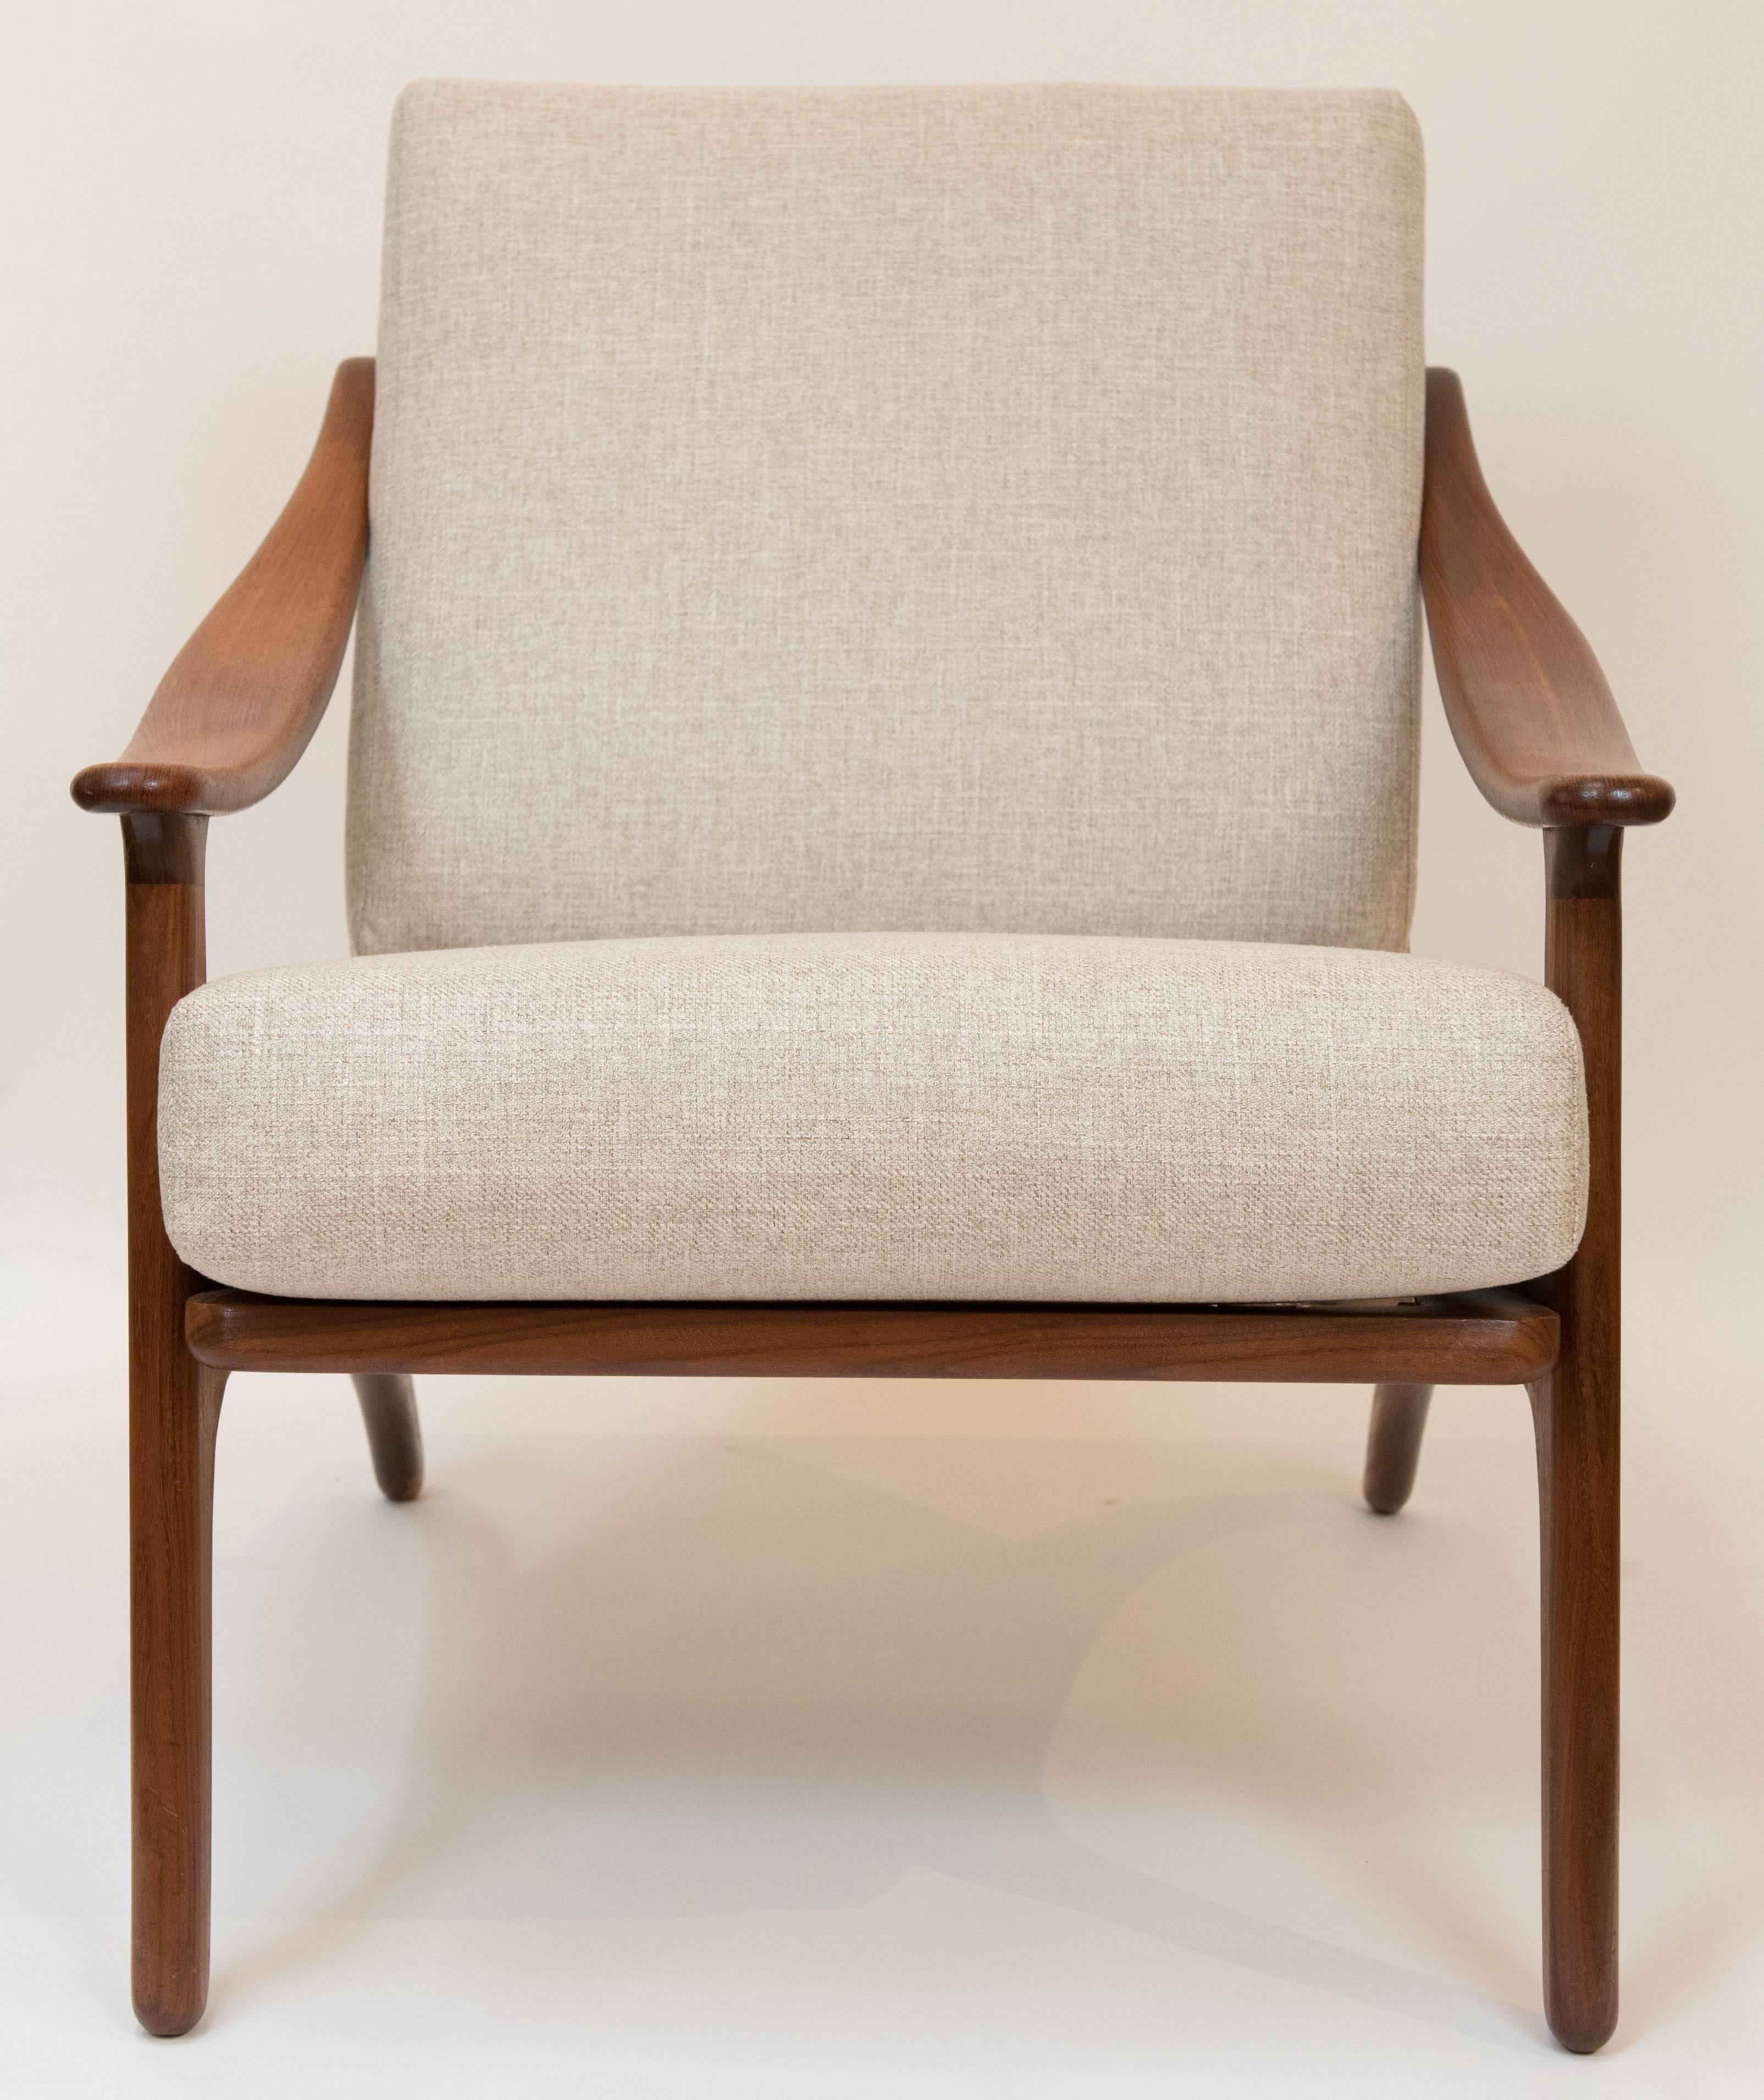 A pair of elegant teak arm chairs with rich wood grain and lean lines. This savy
pair of Danish chairs have been reupholstered in a warm soft oatmeal
colored fabric with new foam interiors.